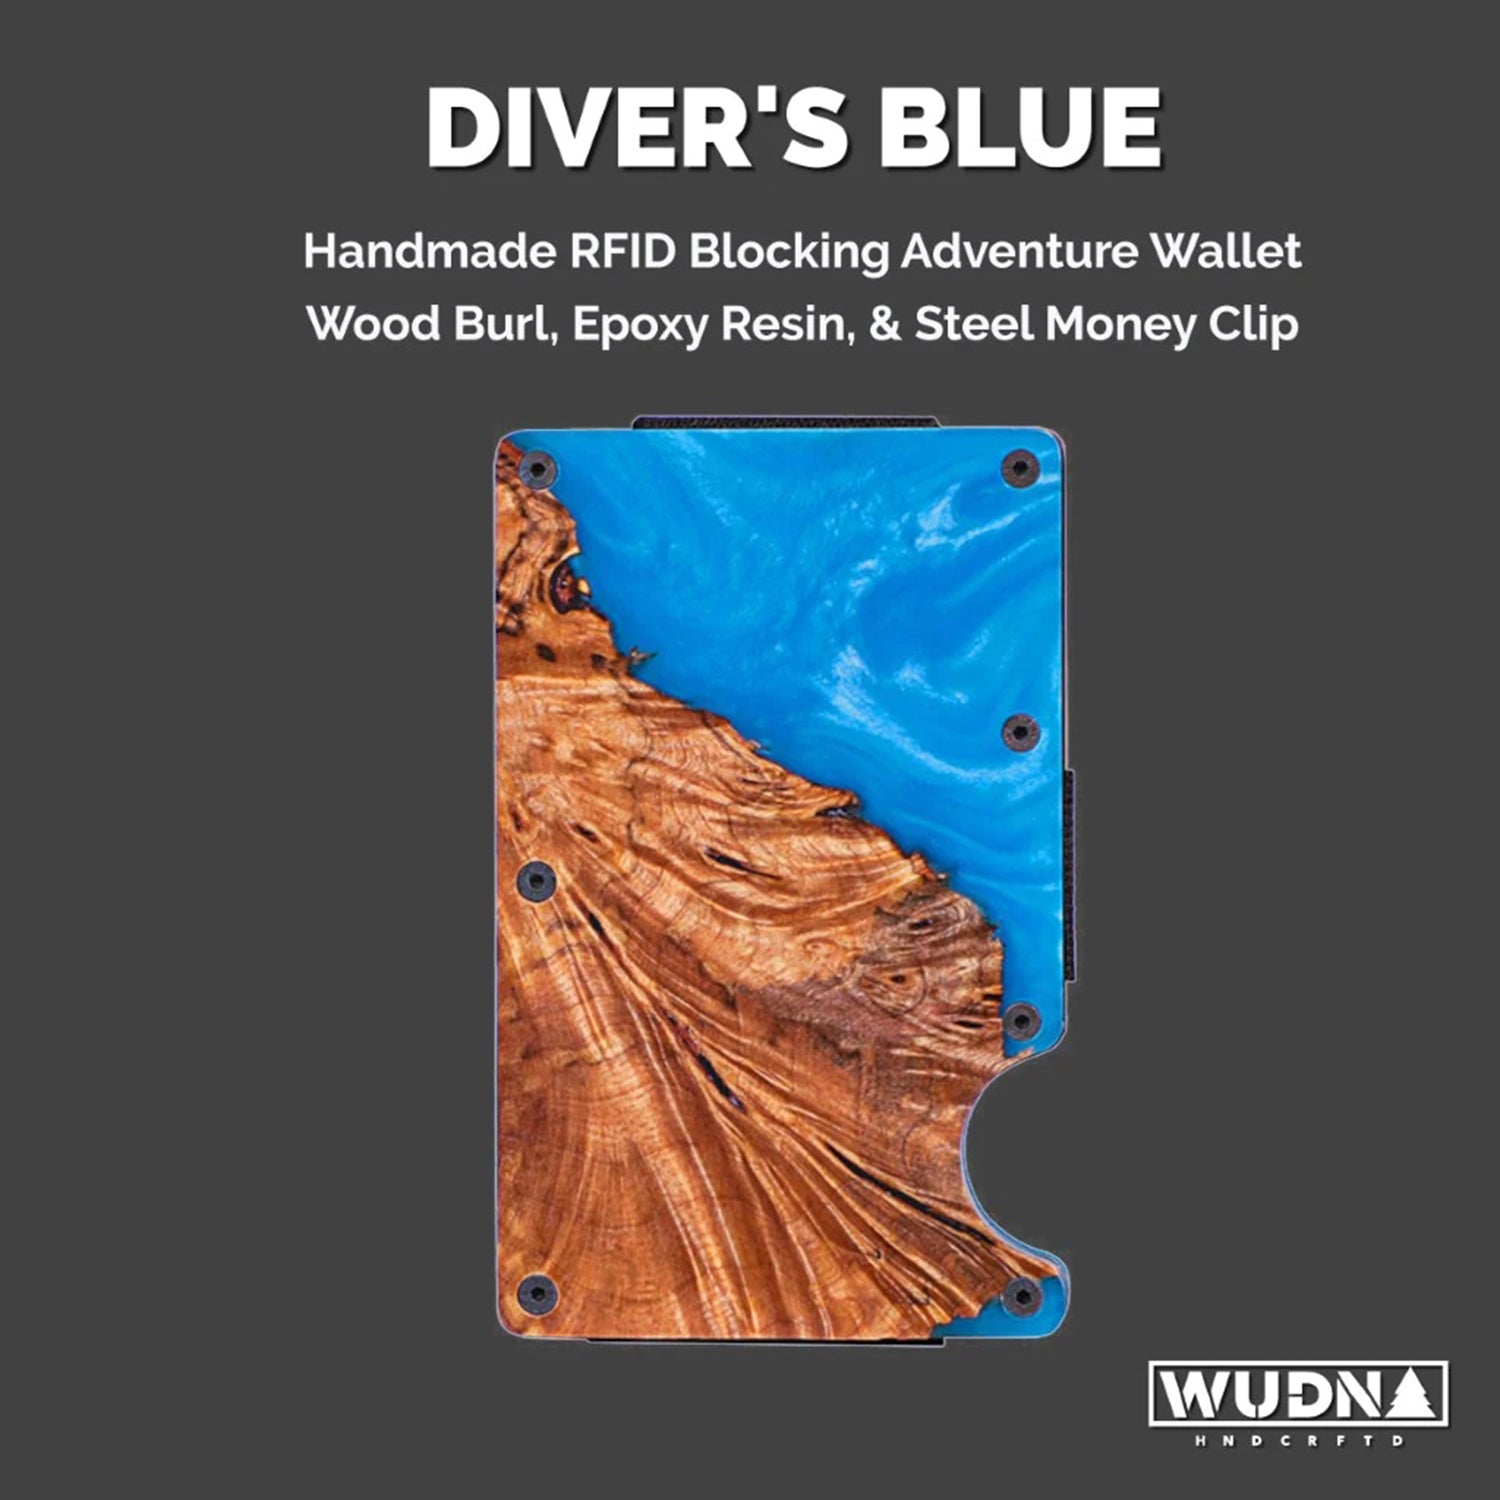 WUDN Adventure Handcrafted Wallet Resin & Wood RFID Money Clip Diver's Blue